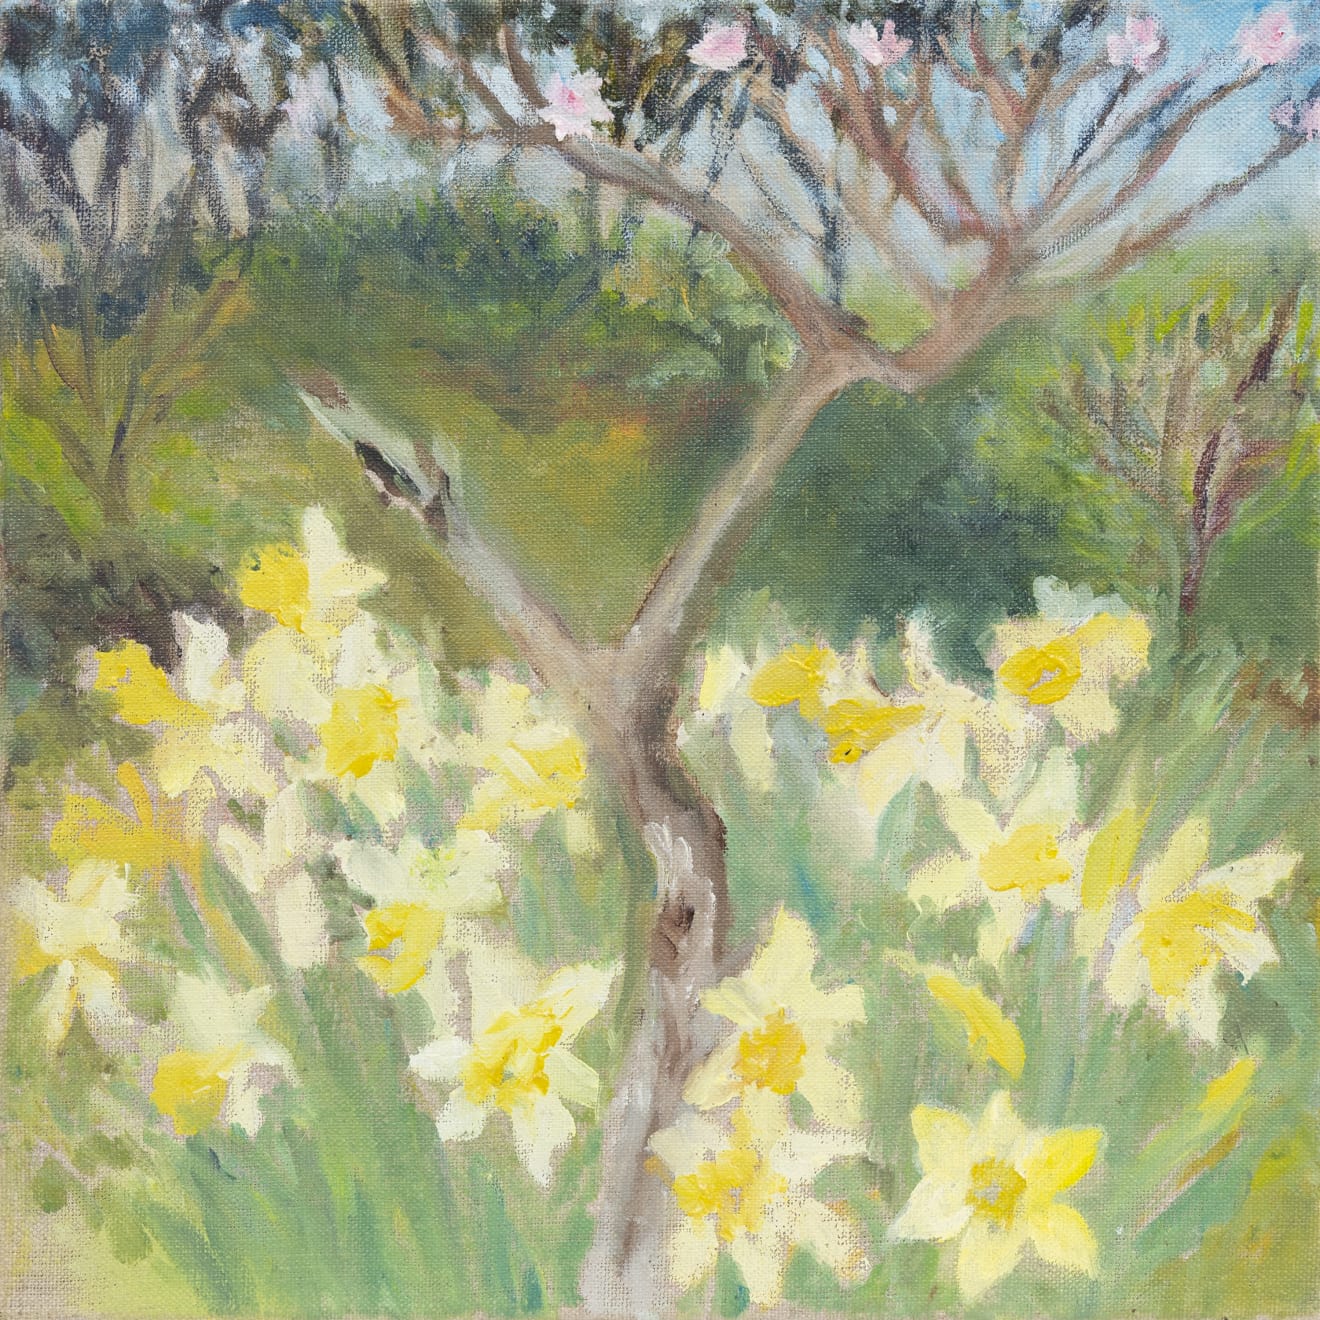 Star GOSSAGE, Peach Tree with the Daffodils, 2020